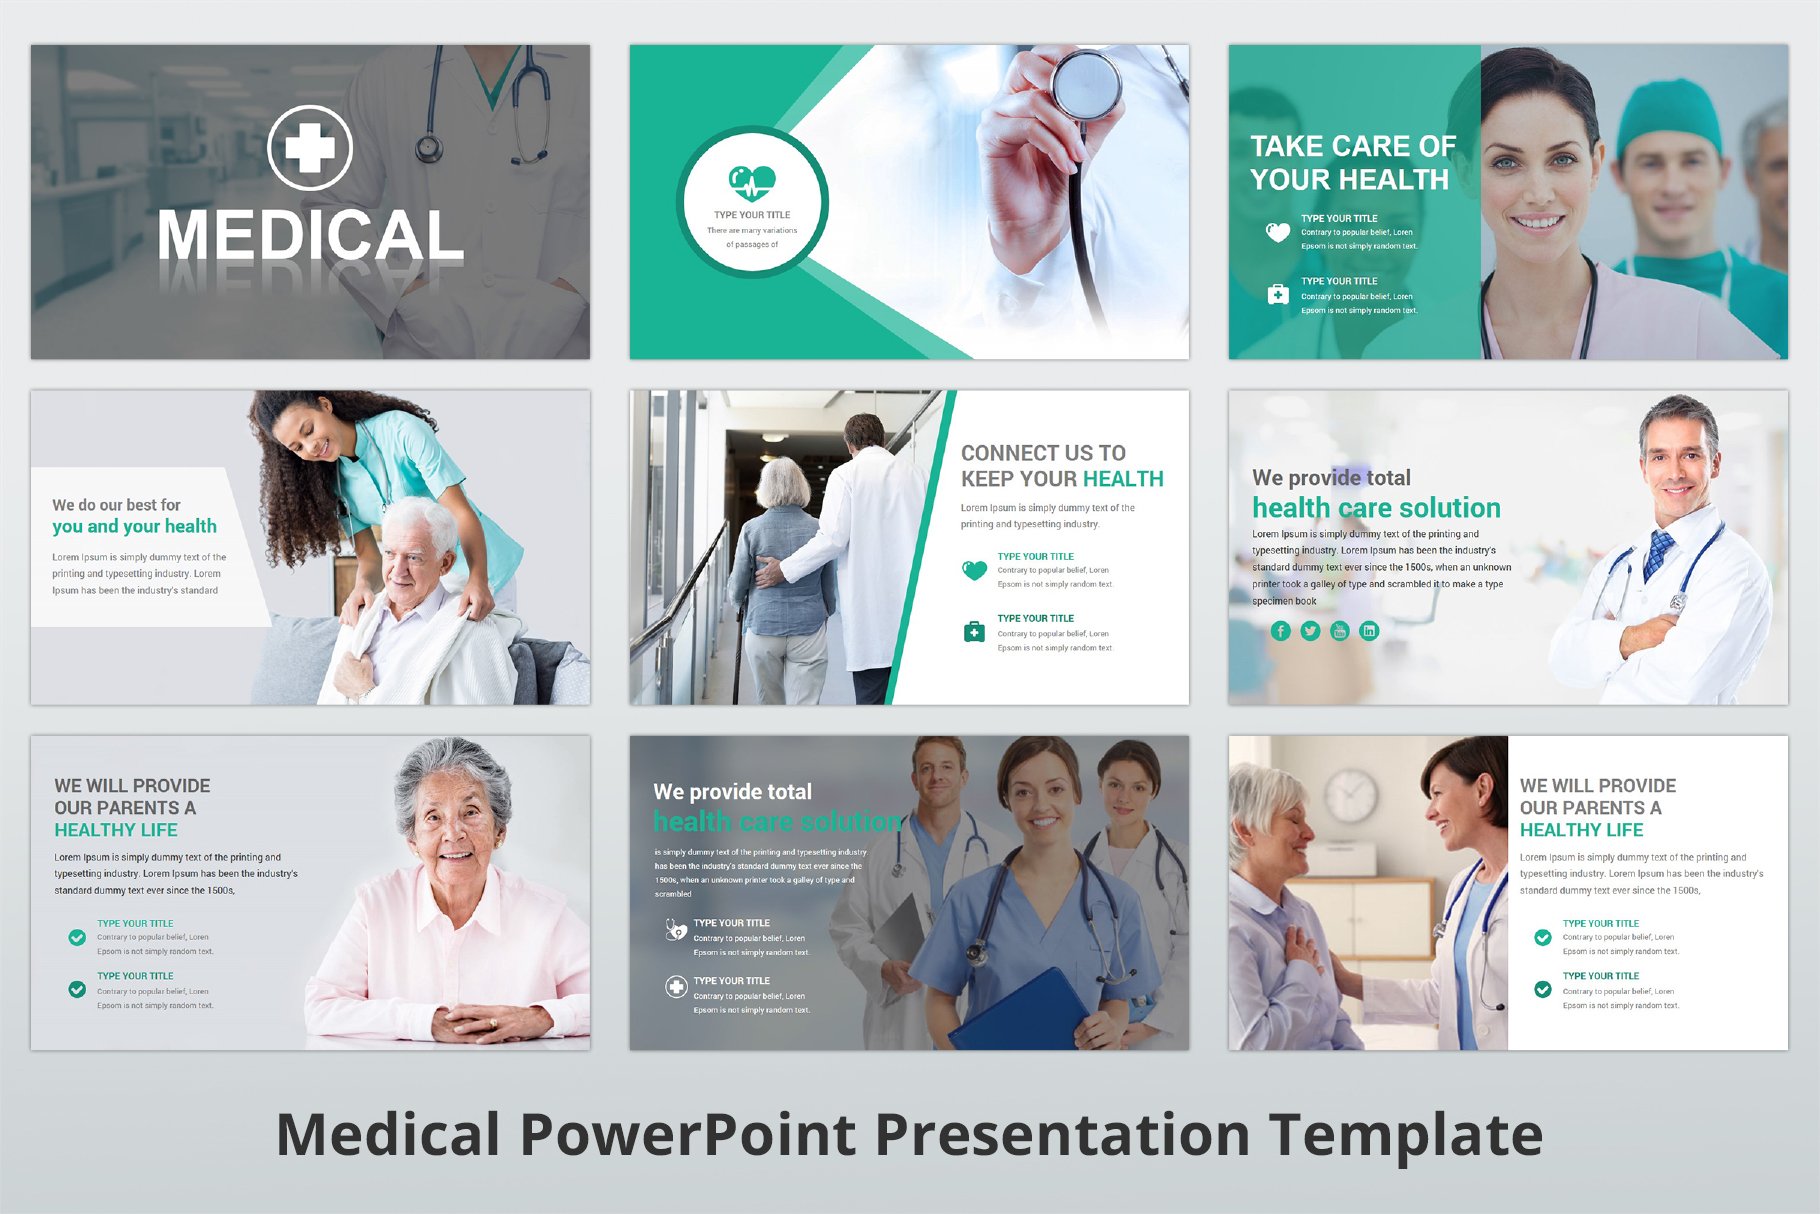 A simple and convenient template for medical topics.